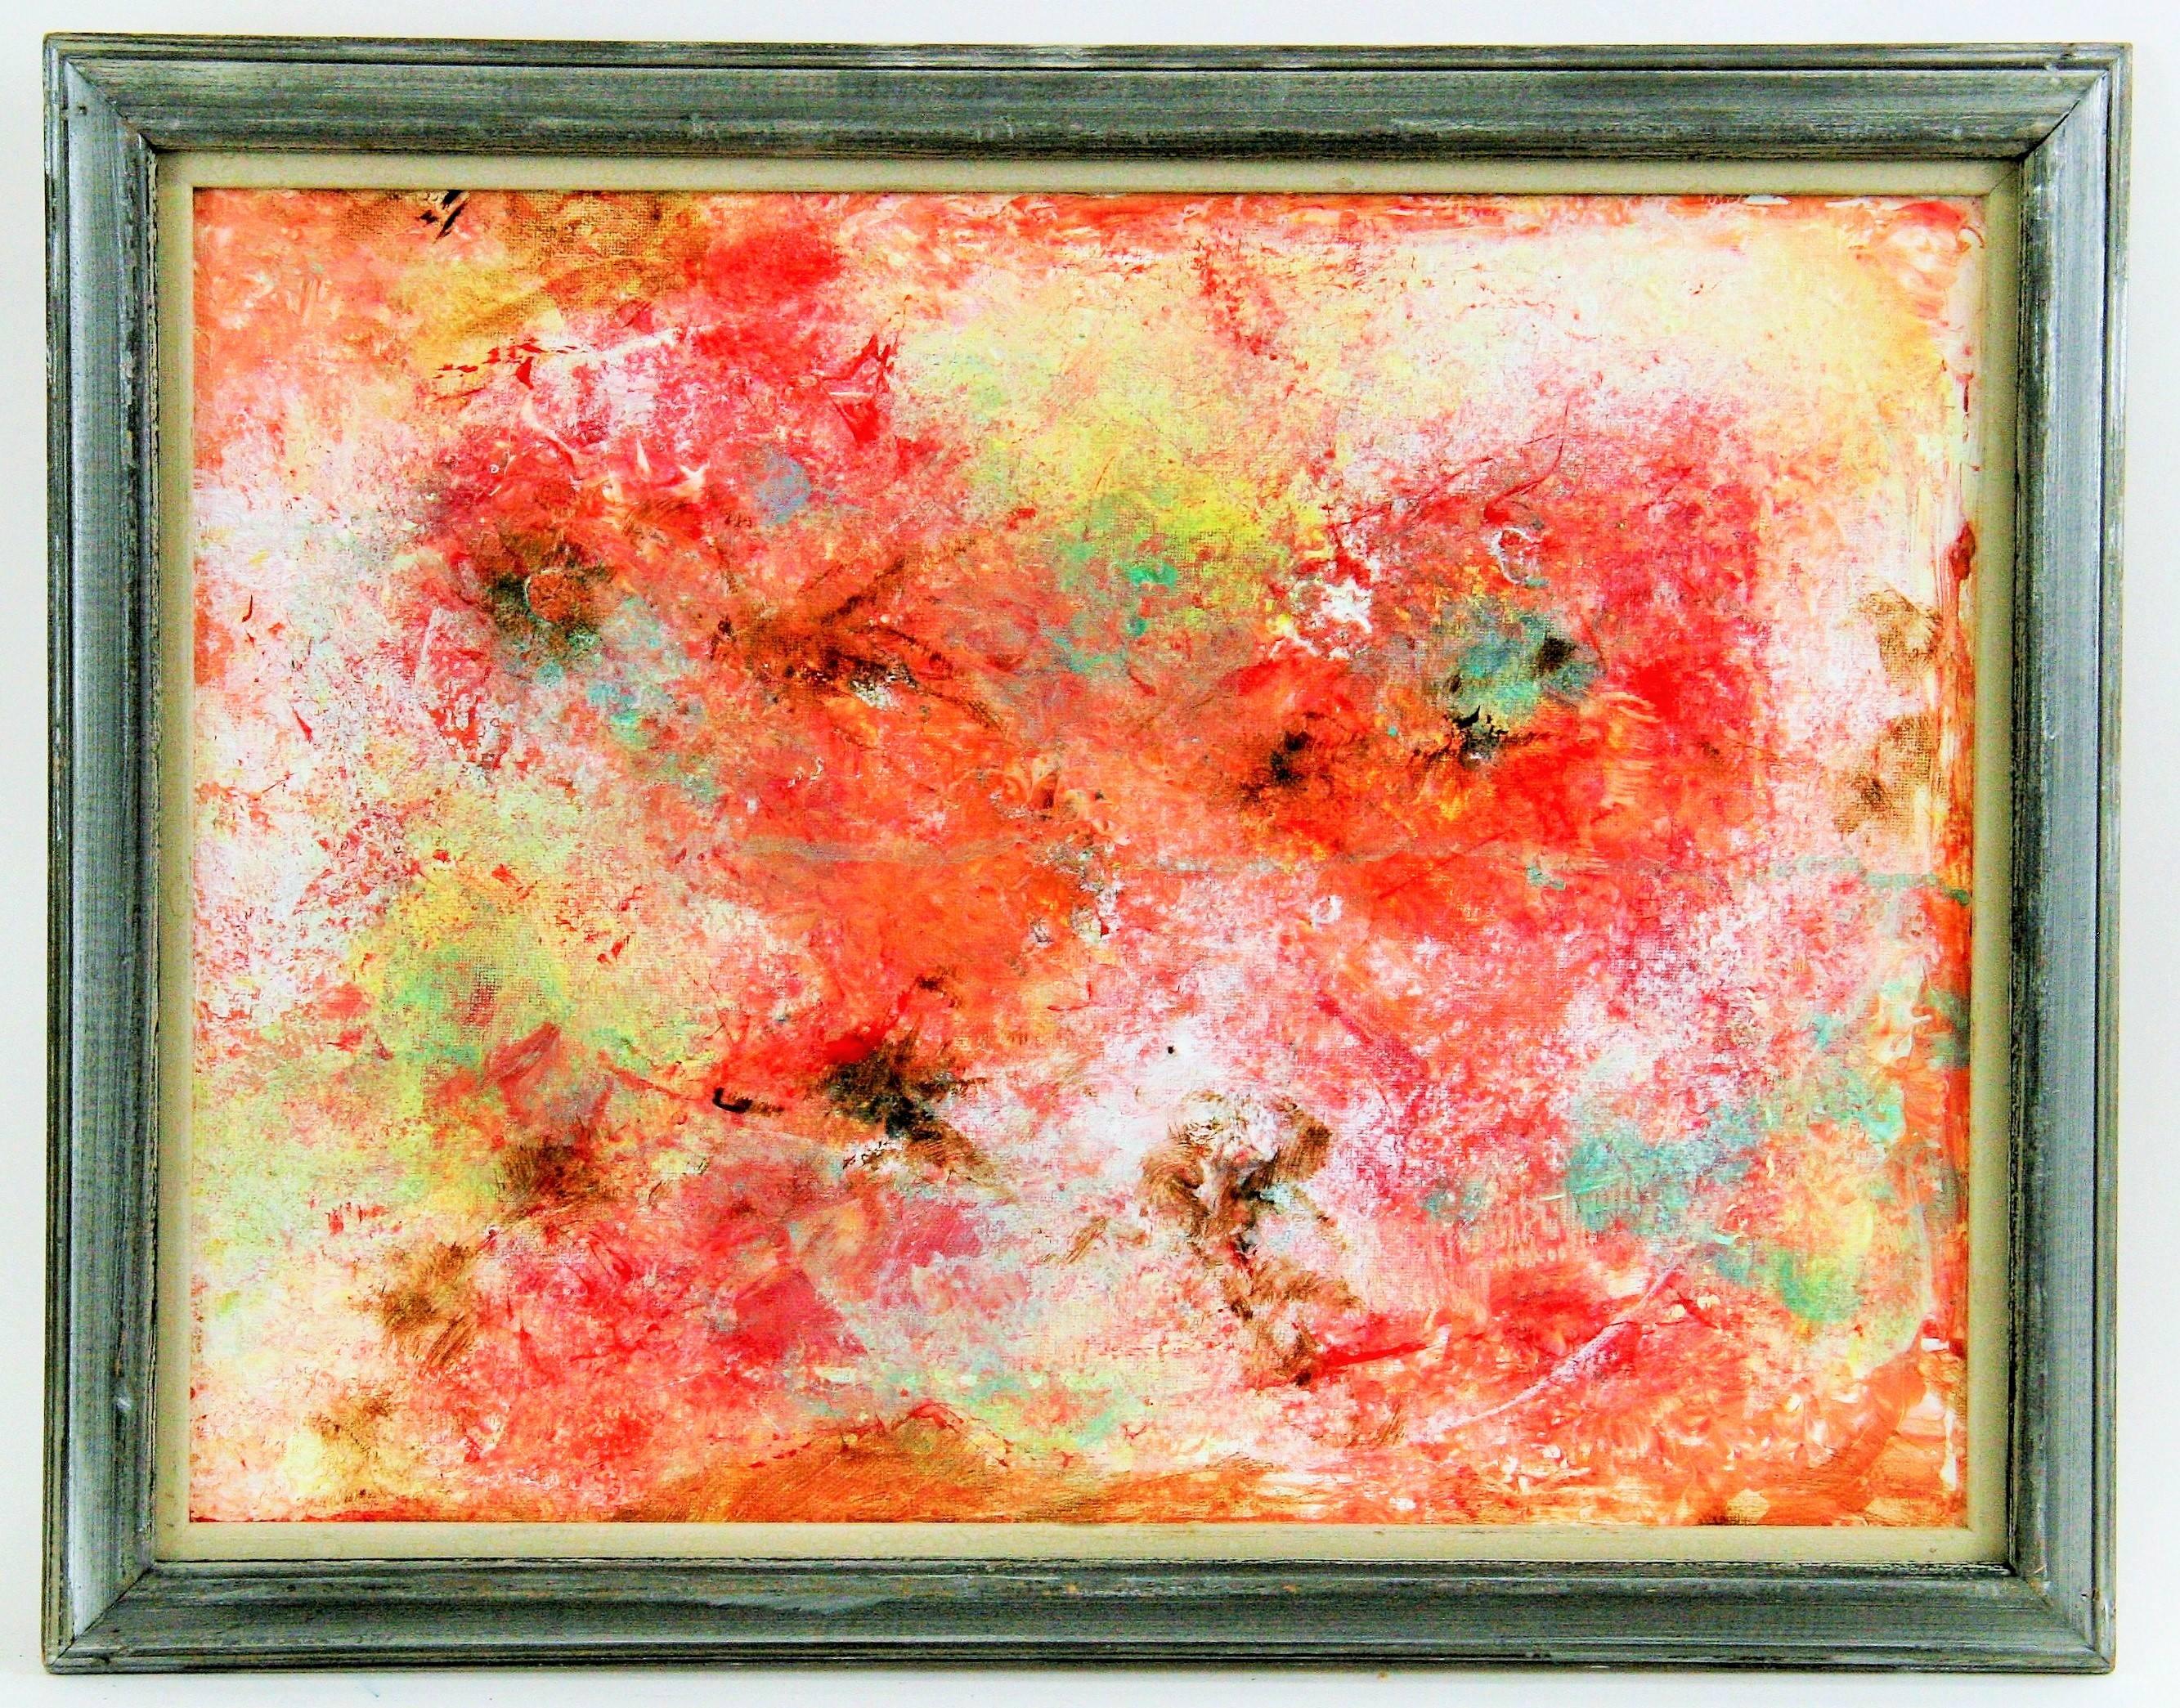  Red Palette Abstract Painting 4